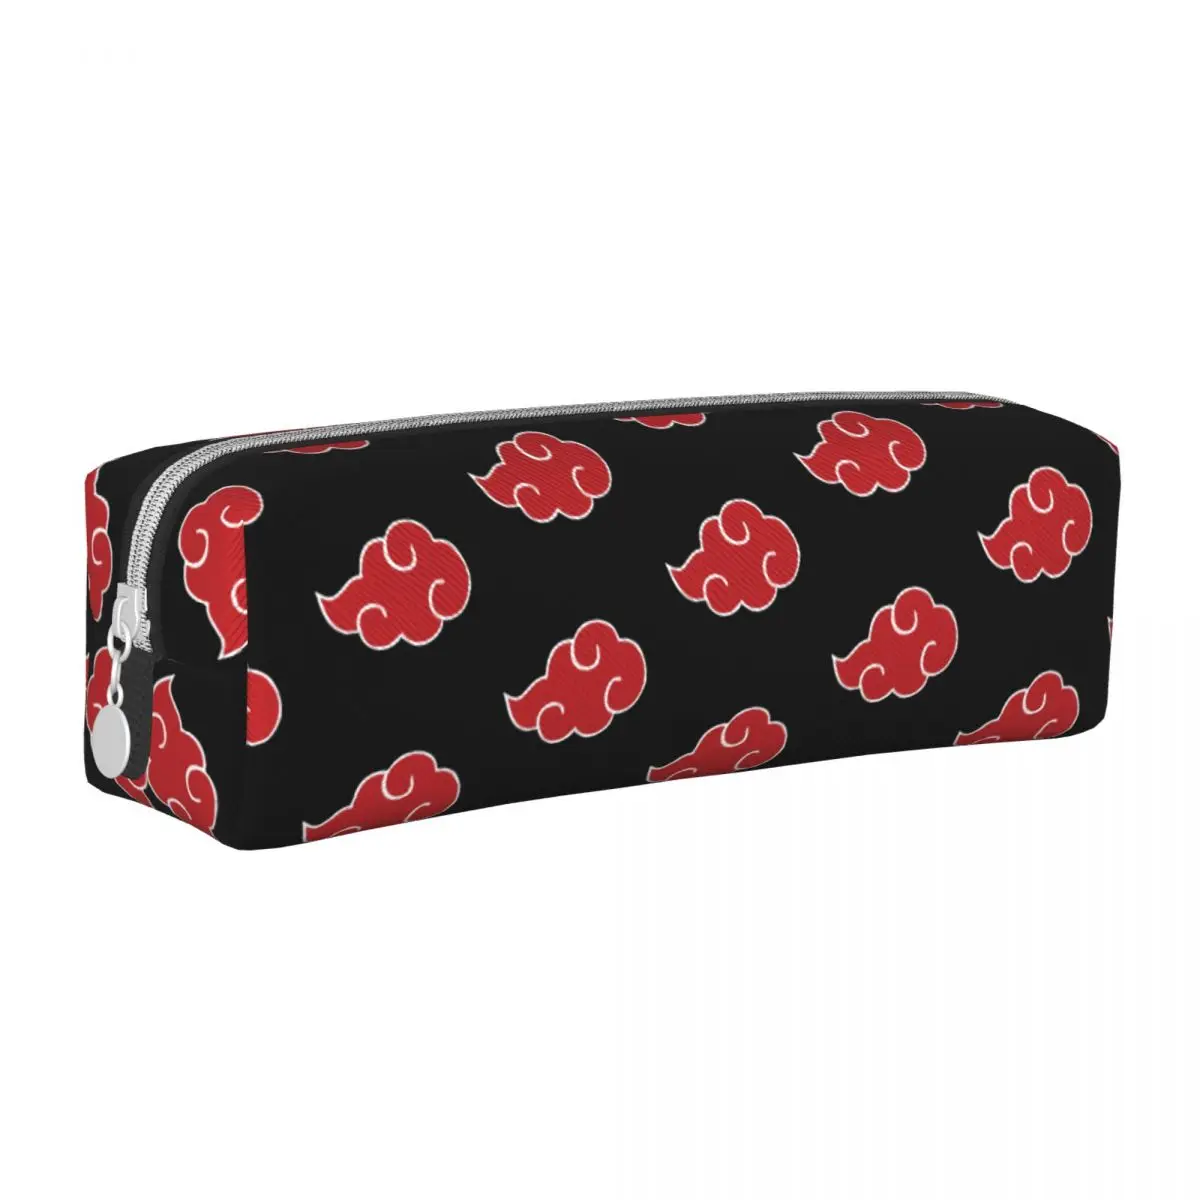 

Cute Japan Anime Akatsuki Clouds Pencil Case Konoha Neji Pencil Pouch Pen for Student Large Storage Bags School Gifts Stationery